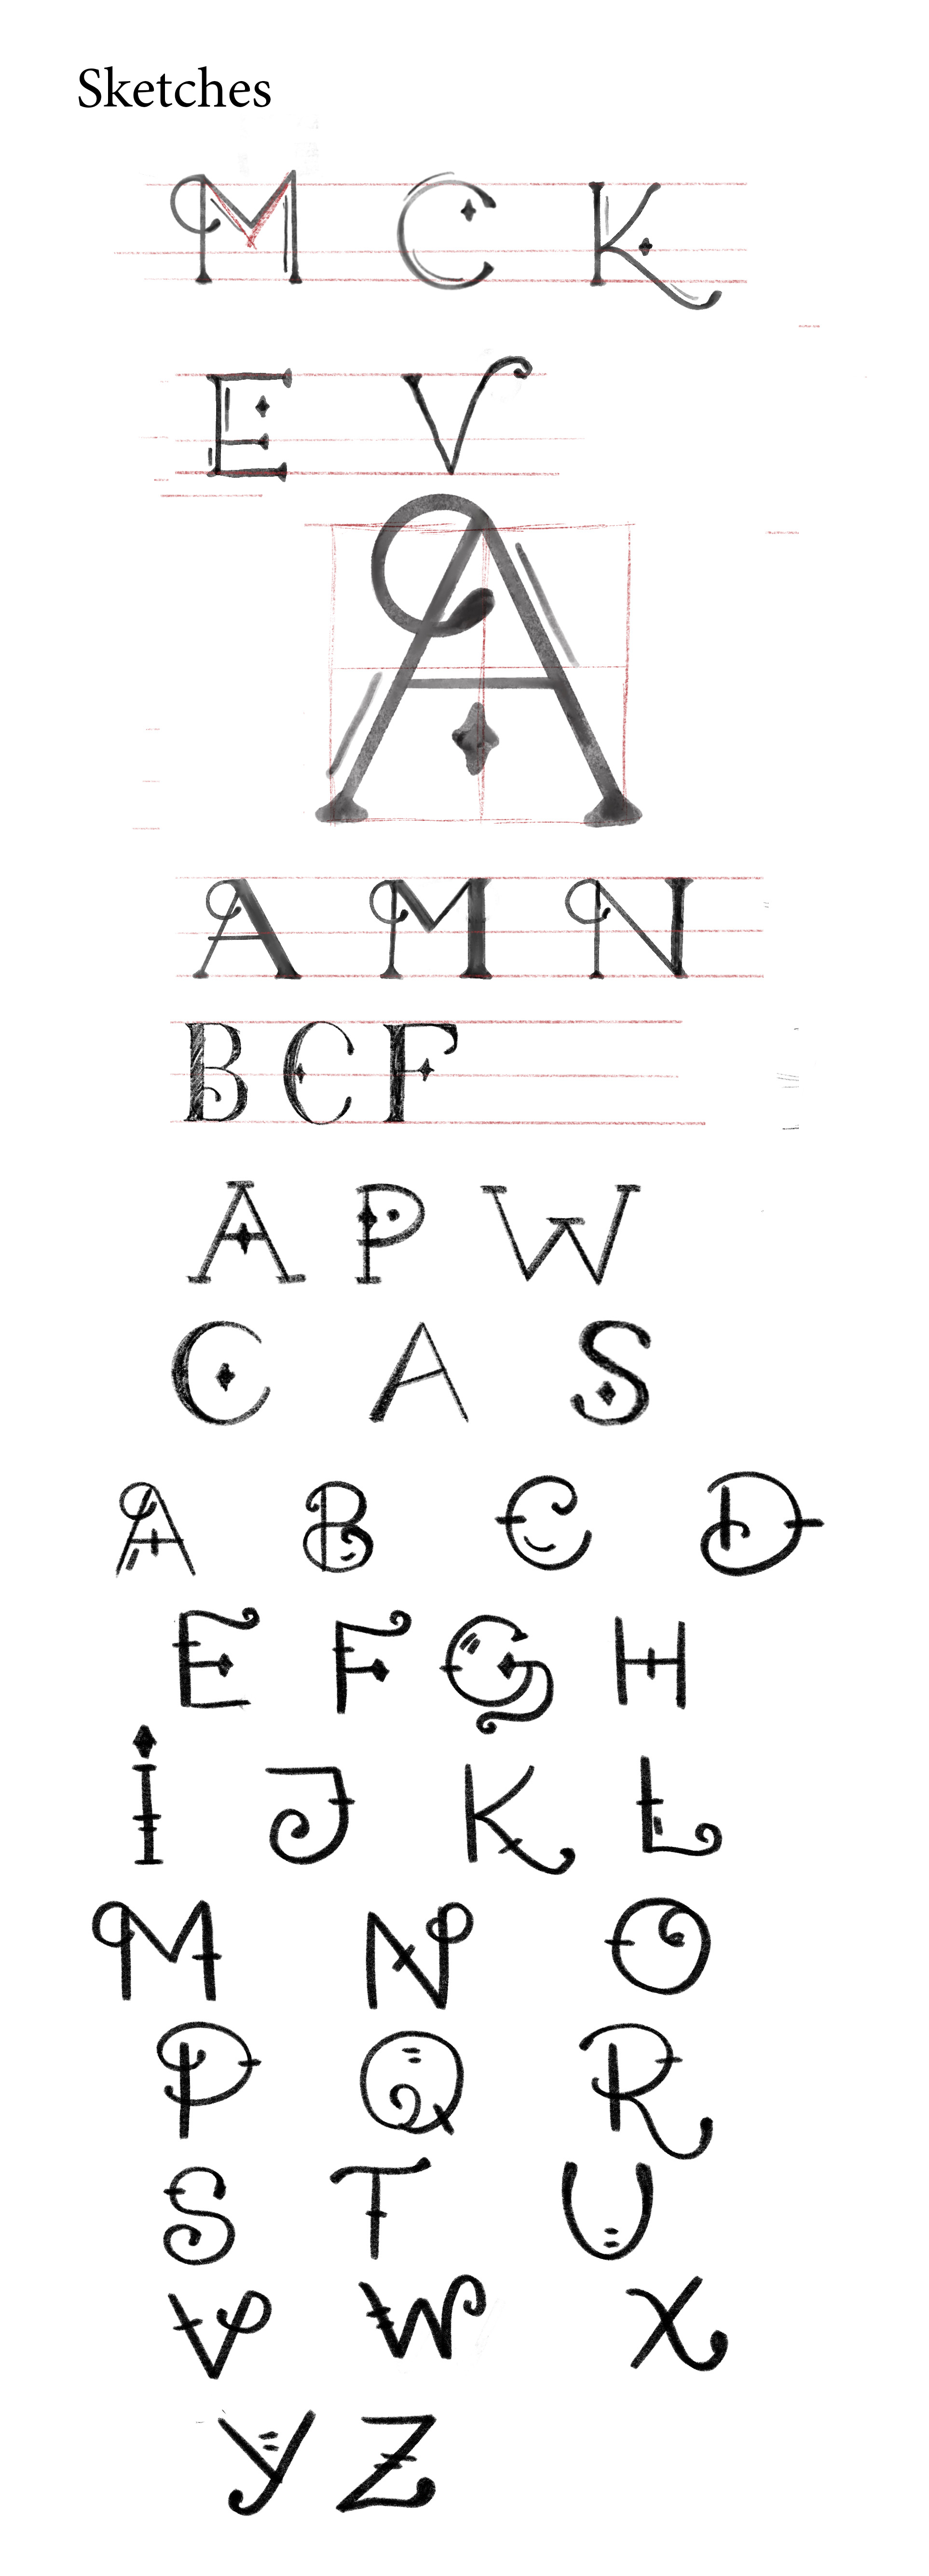 This is an image of letters.